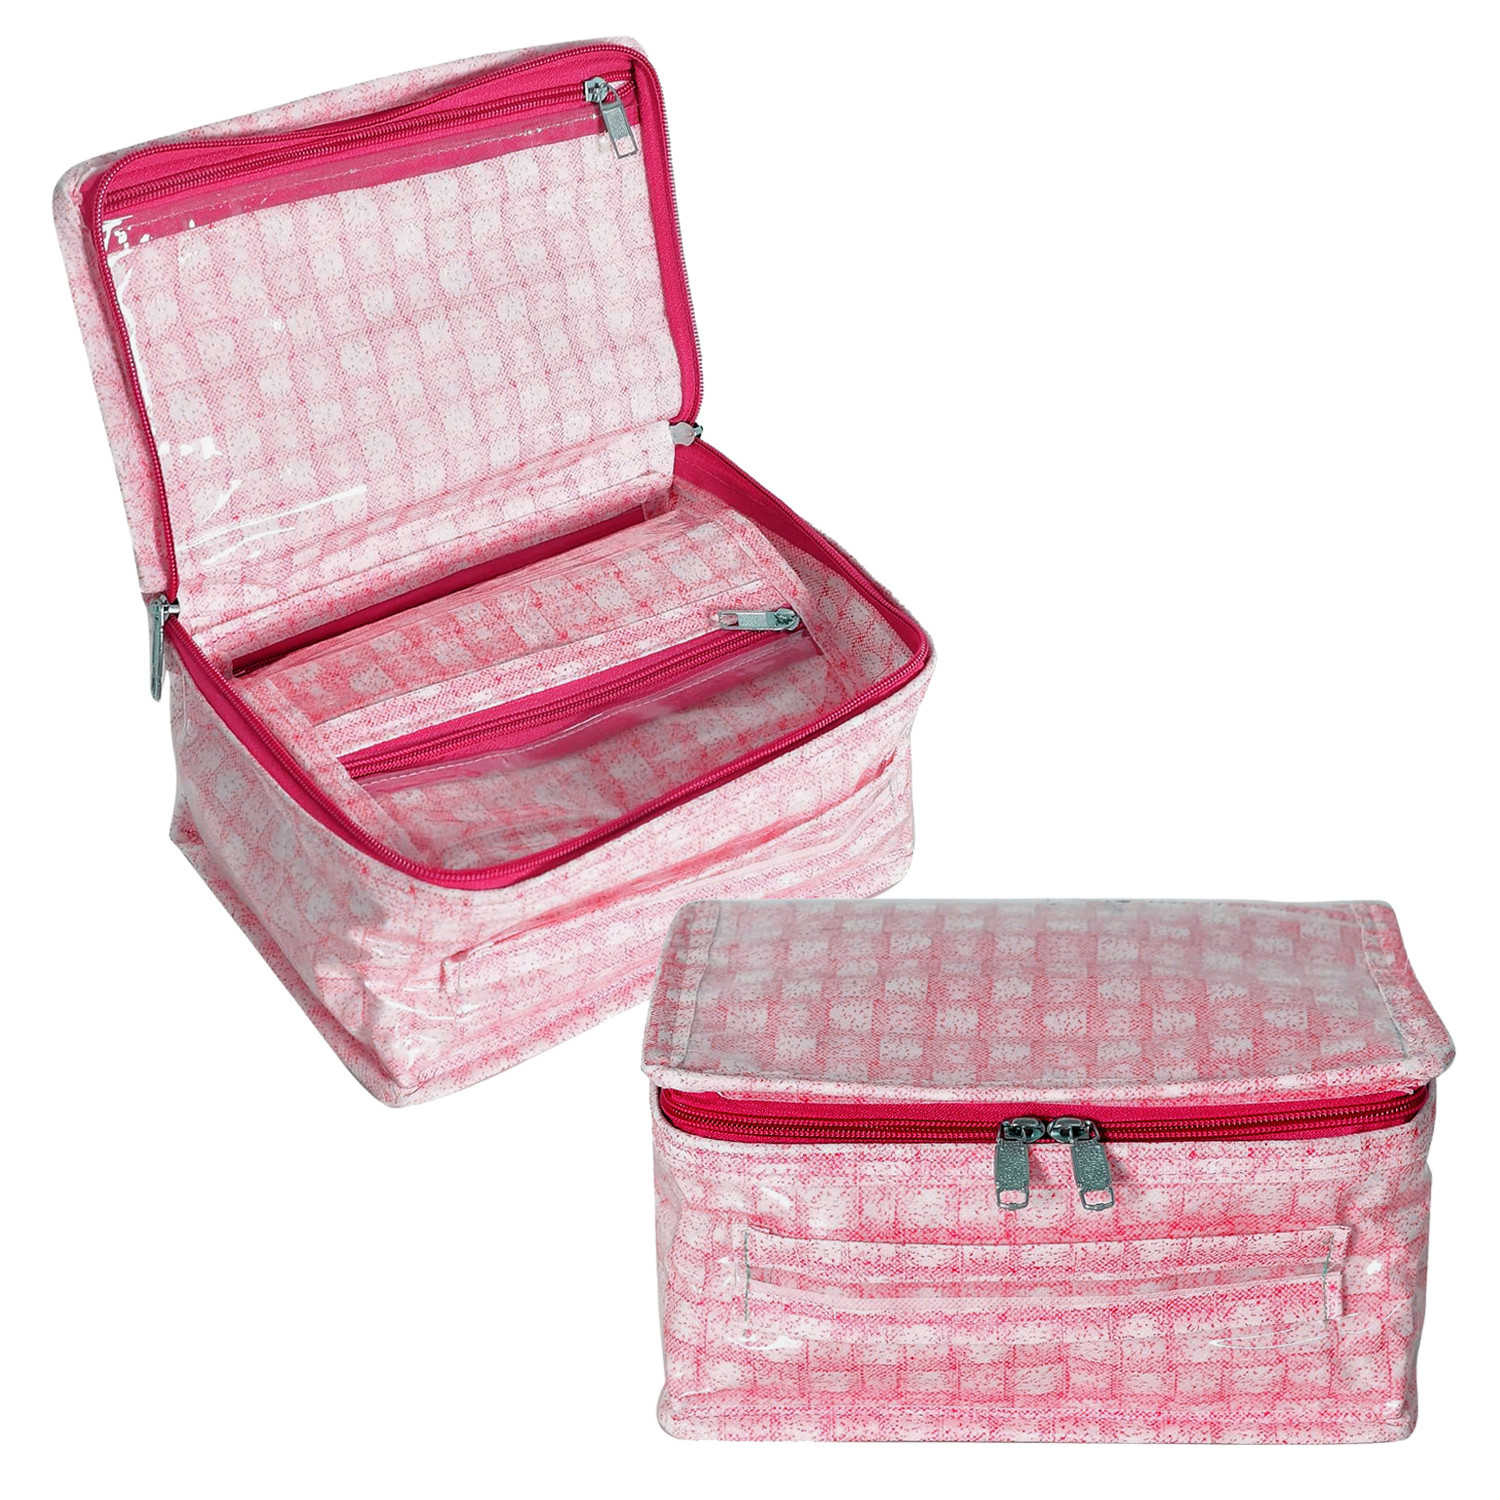 Kuber Industries Jewellery Kit | Check Design Vanity Box for woman | Laminated Jewellery Kit for woman | Jewellery Kit with 8 Transparent Pouch | Pink